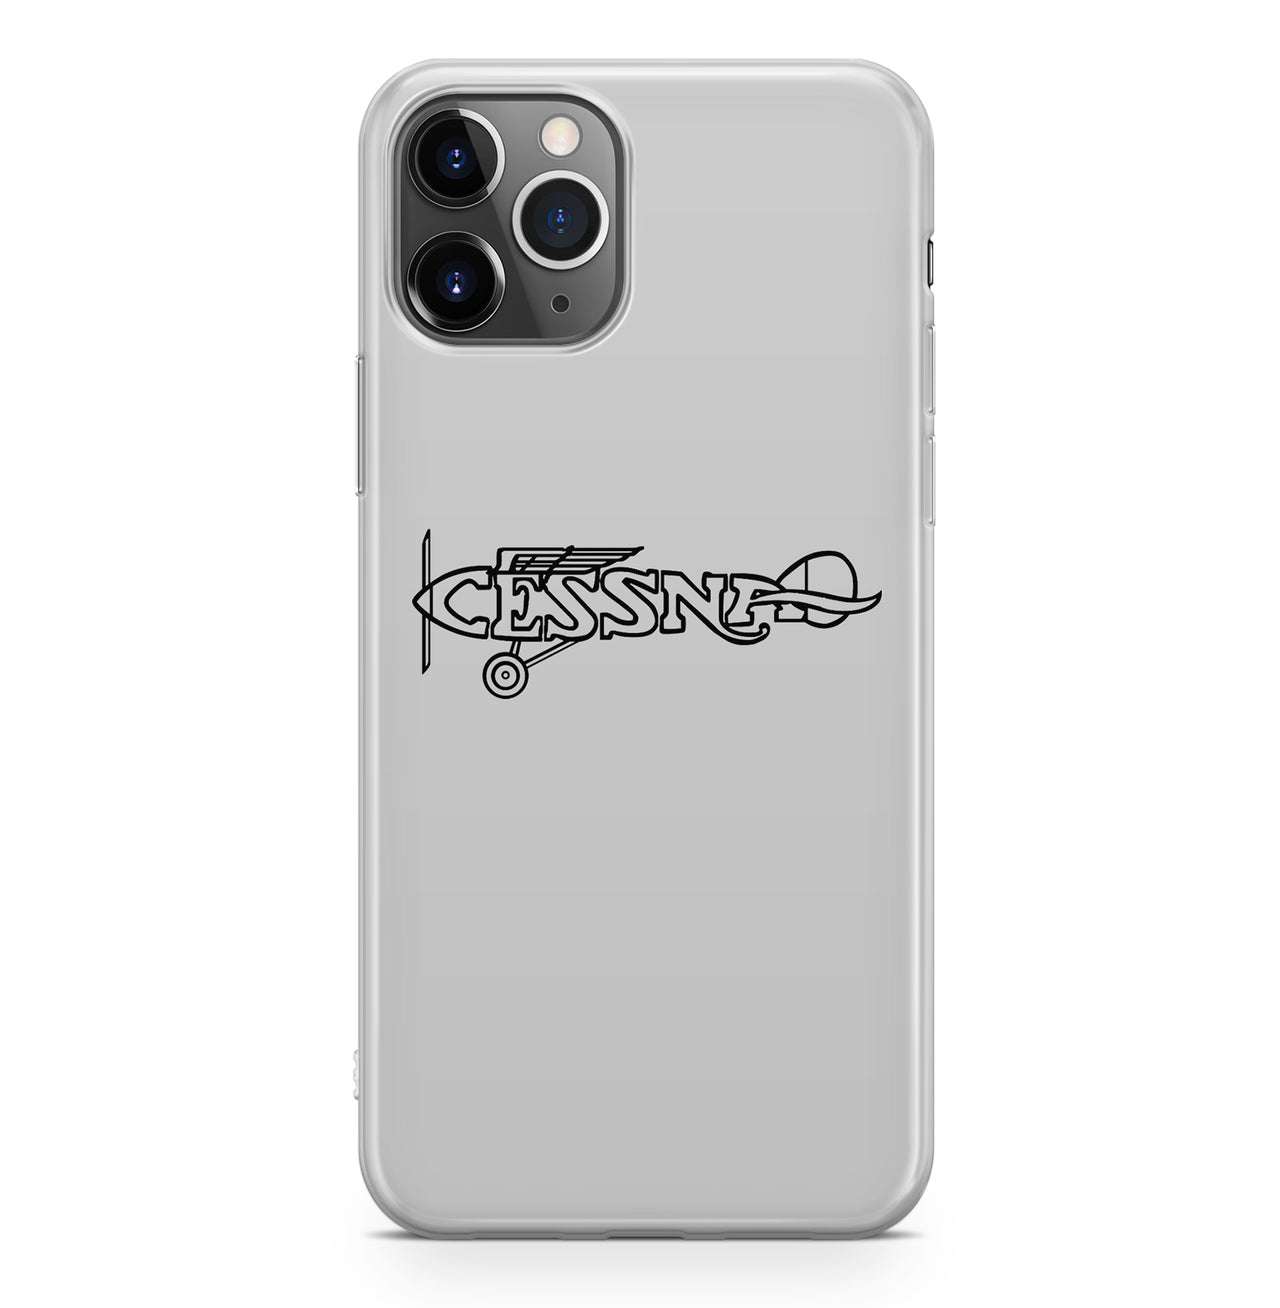 Special Cessna Text Designed iPhone Cases